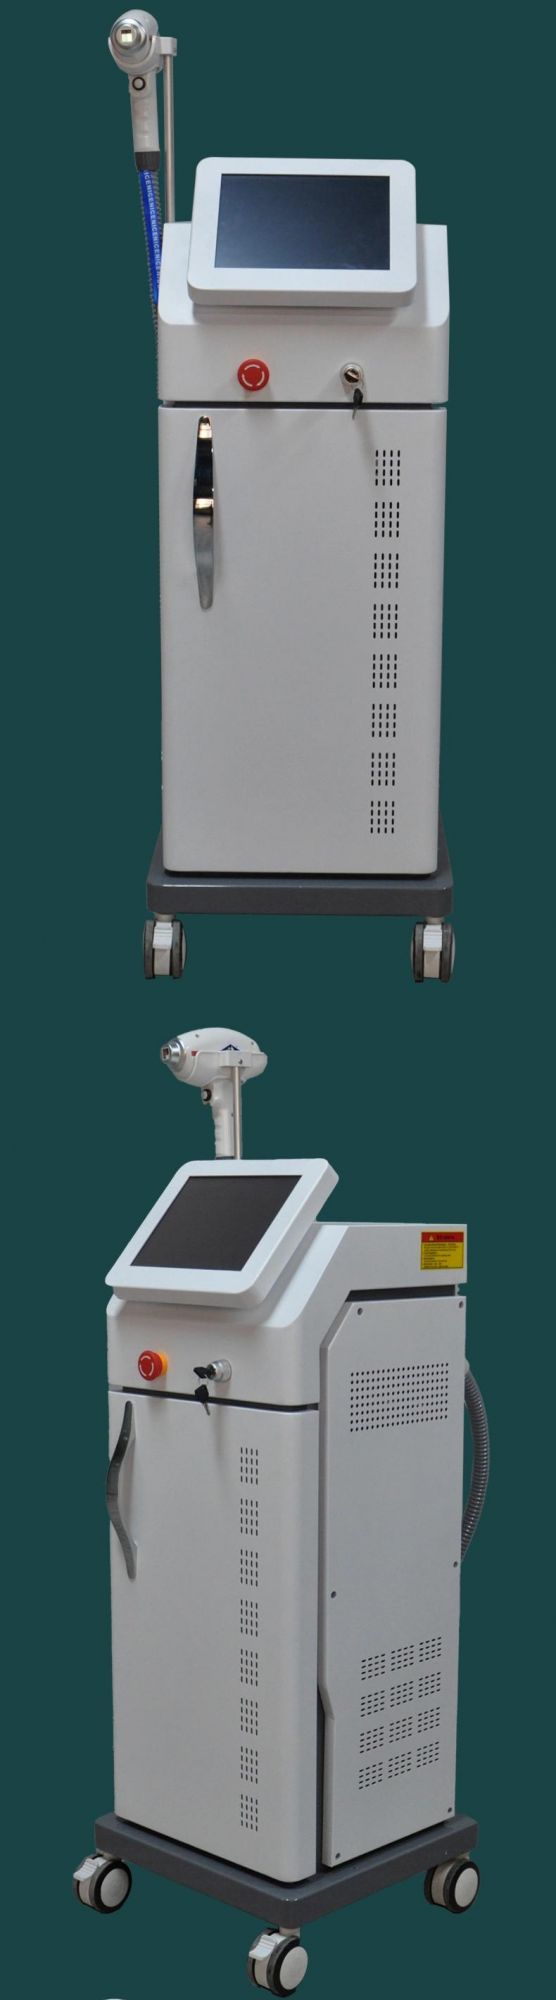 Newest Diode Laser Hair Removal Machine / 808nm Diode Laser Hair Removal /Big Spot Size Bikini Line Diode 755 808 1064 Laser